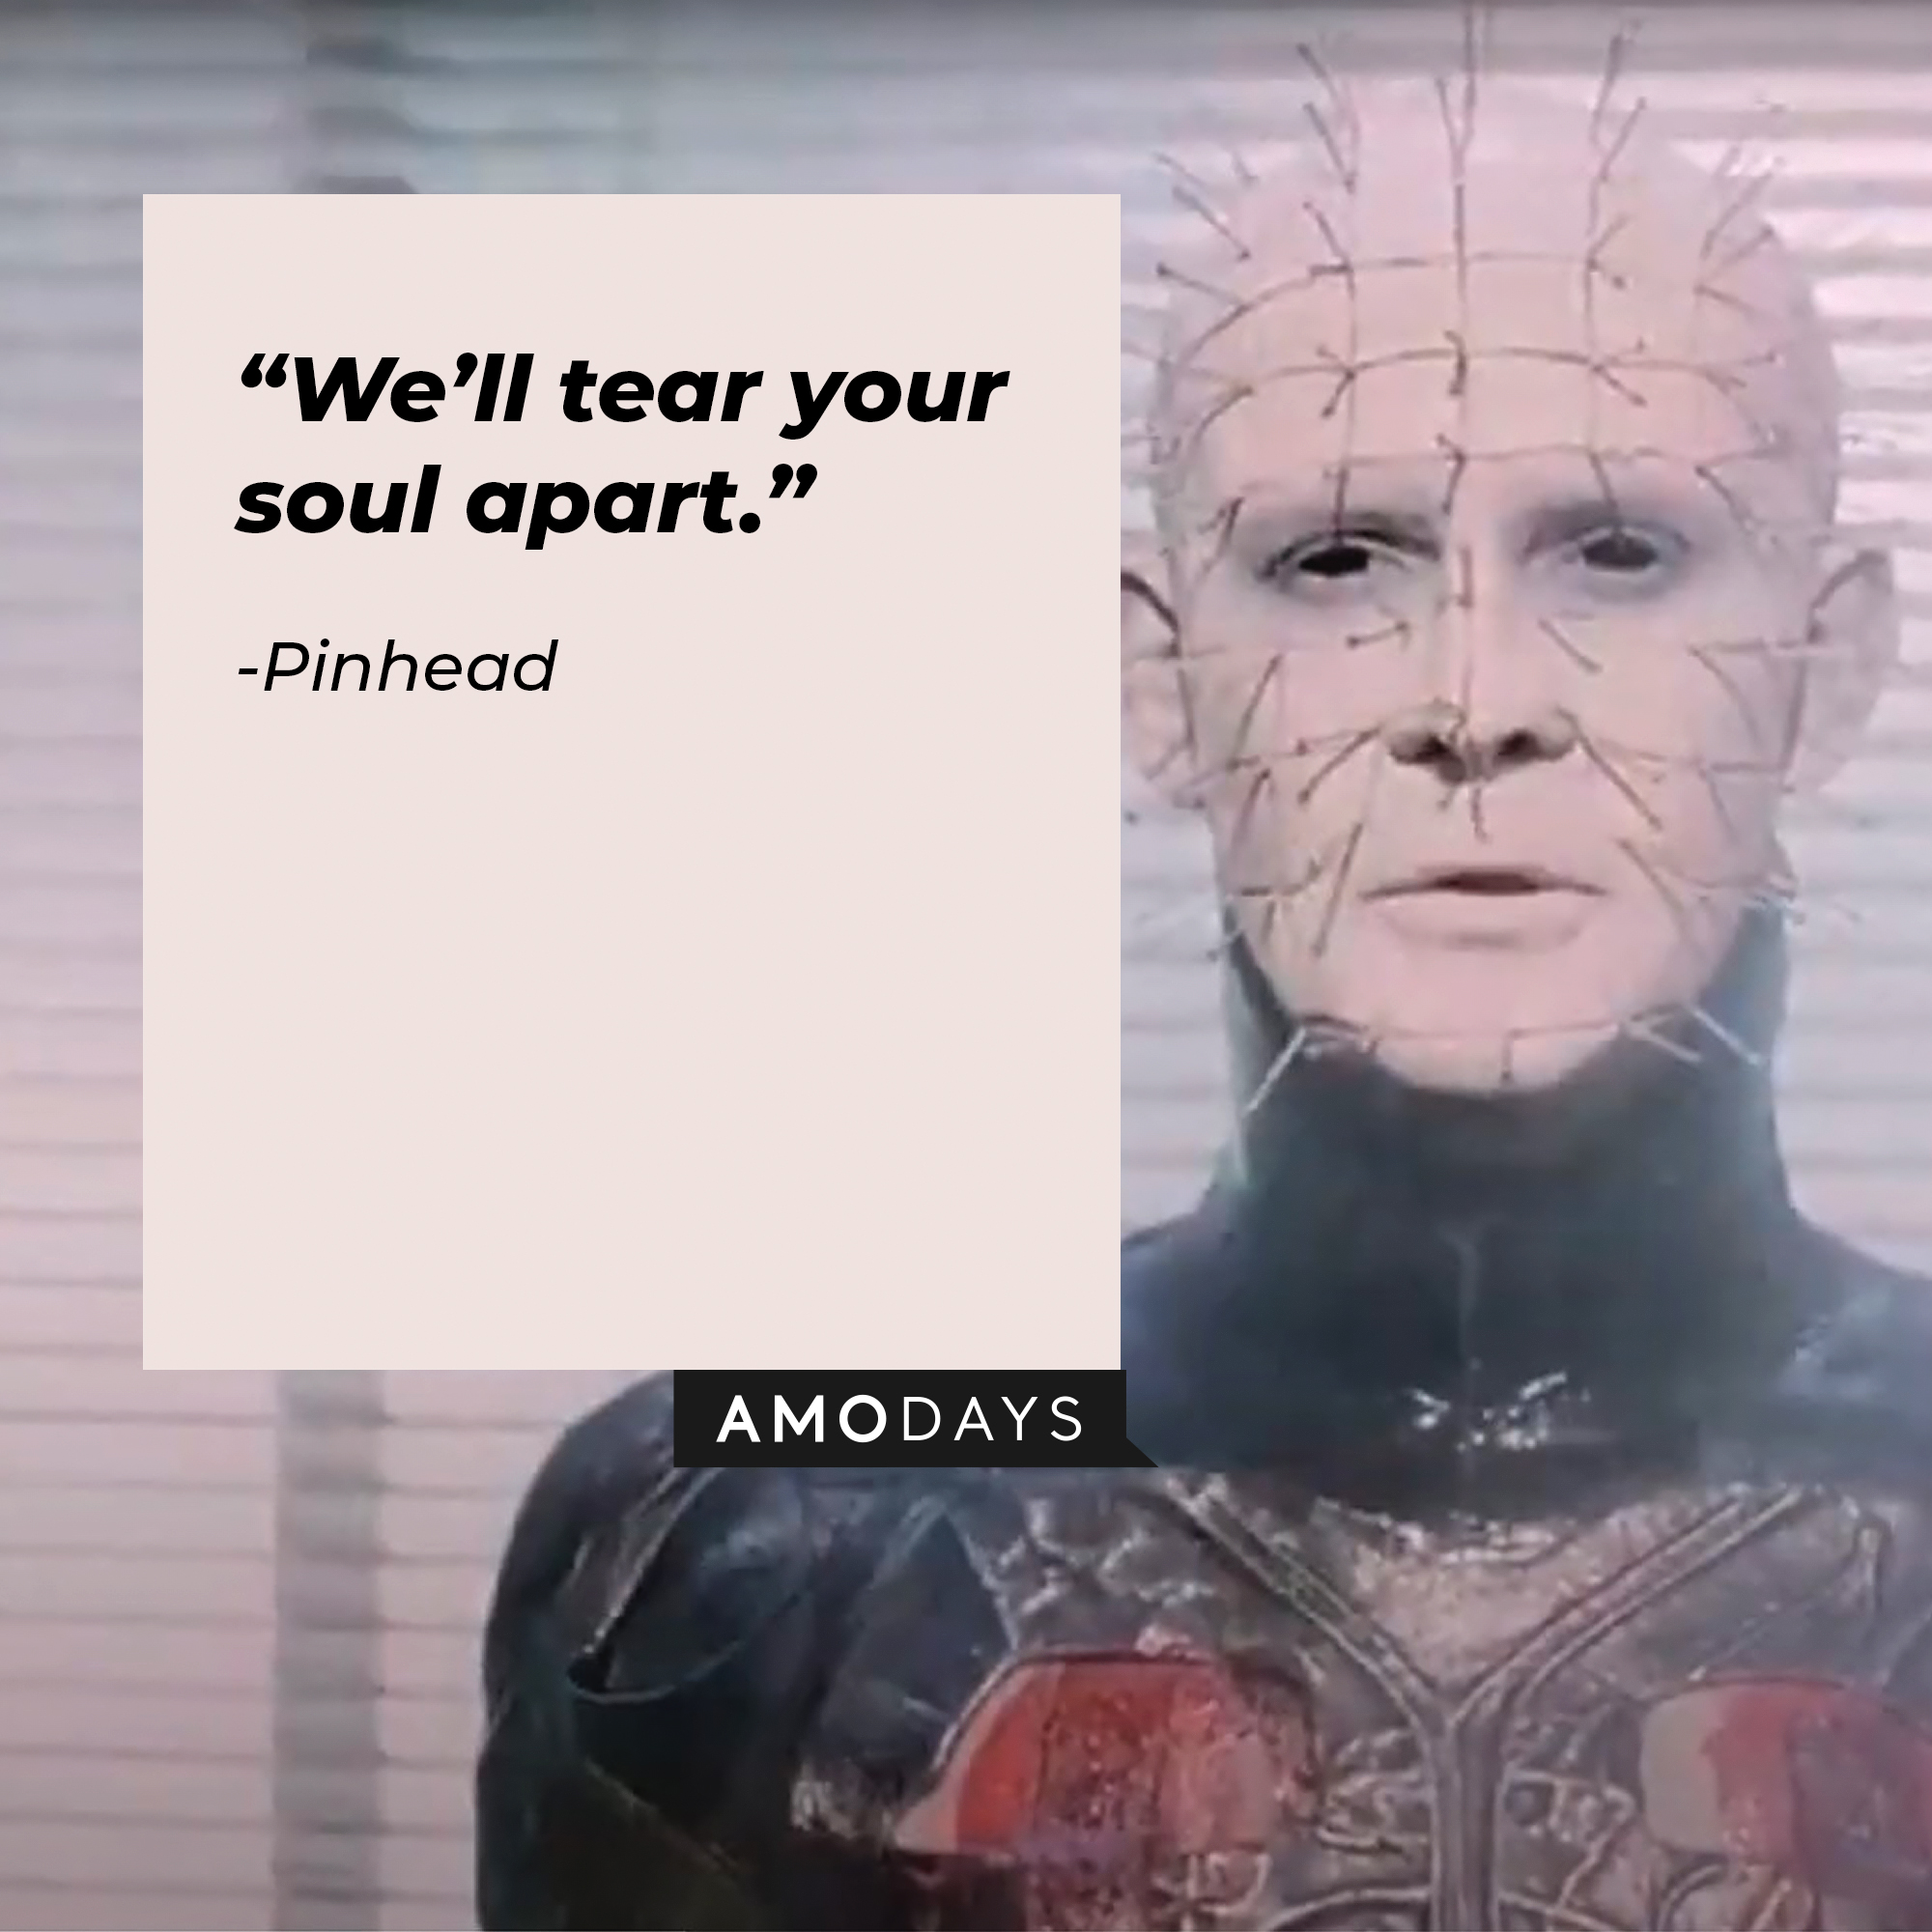 A picture of Pinhead from “Hellraiser” with a quote by him that reads, “We’ll tear your soul apart.”  | Image: facebook.com/HellraiserMovies